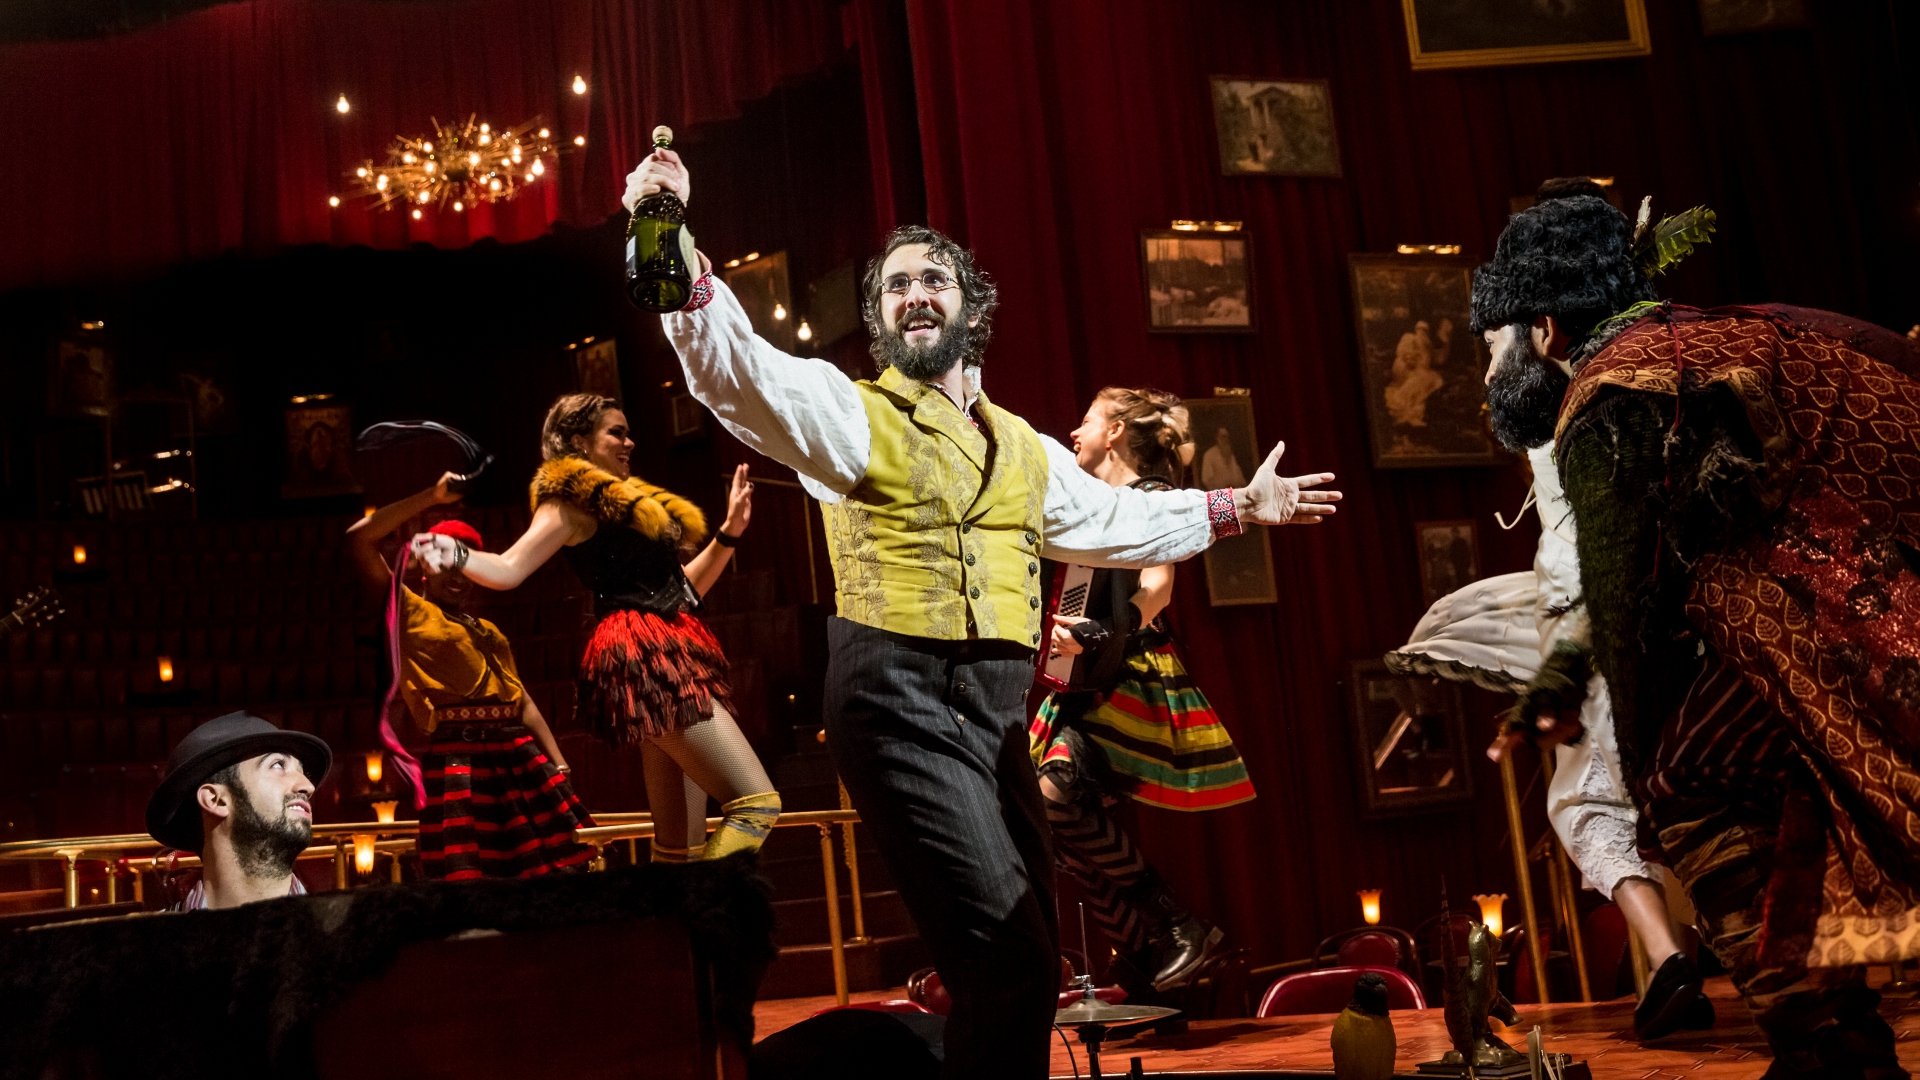 Pierre, played by Josh Groban, joyfully raises a bottle in a shot from Natasha, Pierre, and the Great Comet of 1812, 2016-2017 (Photo by Chad Batka).